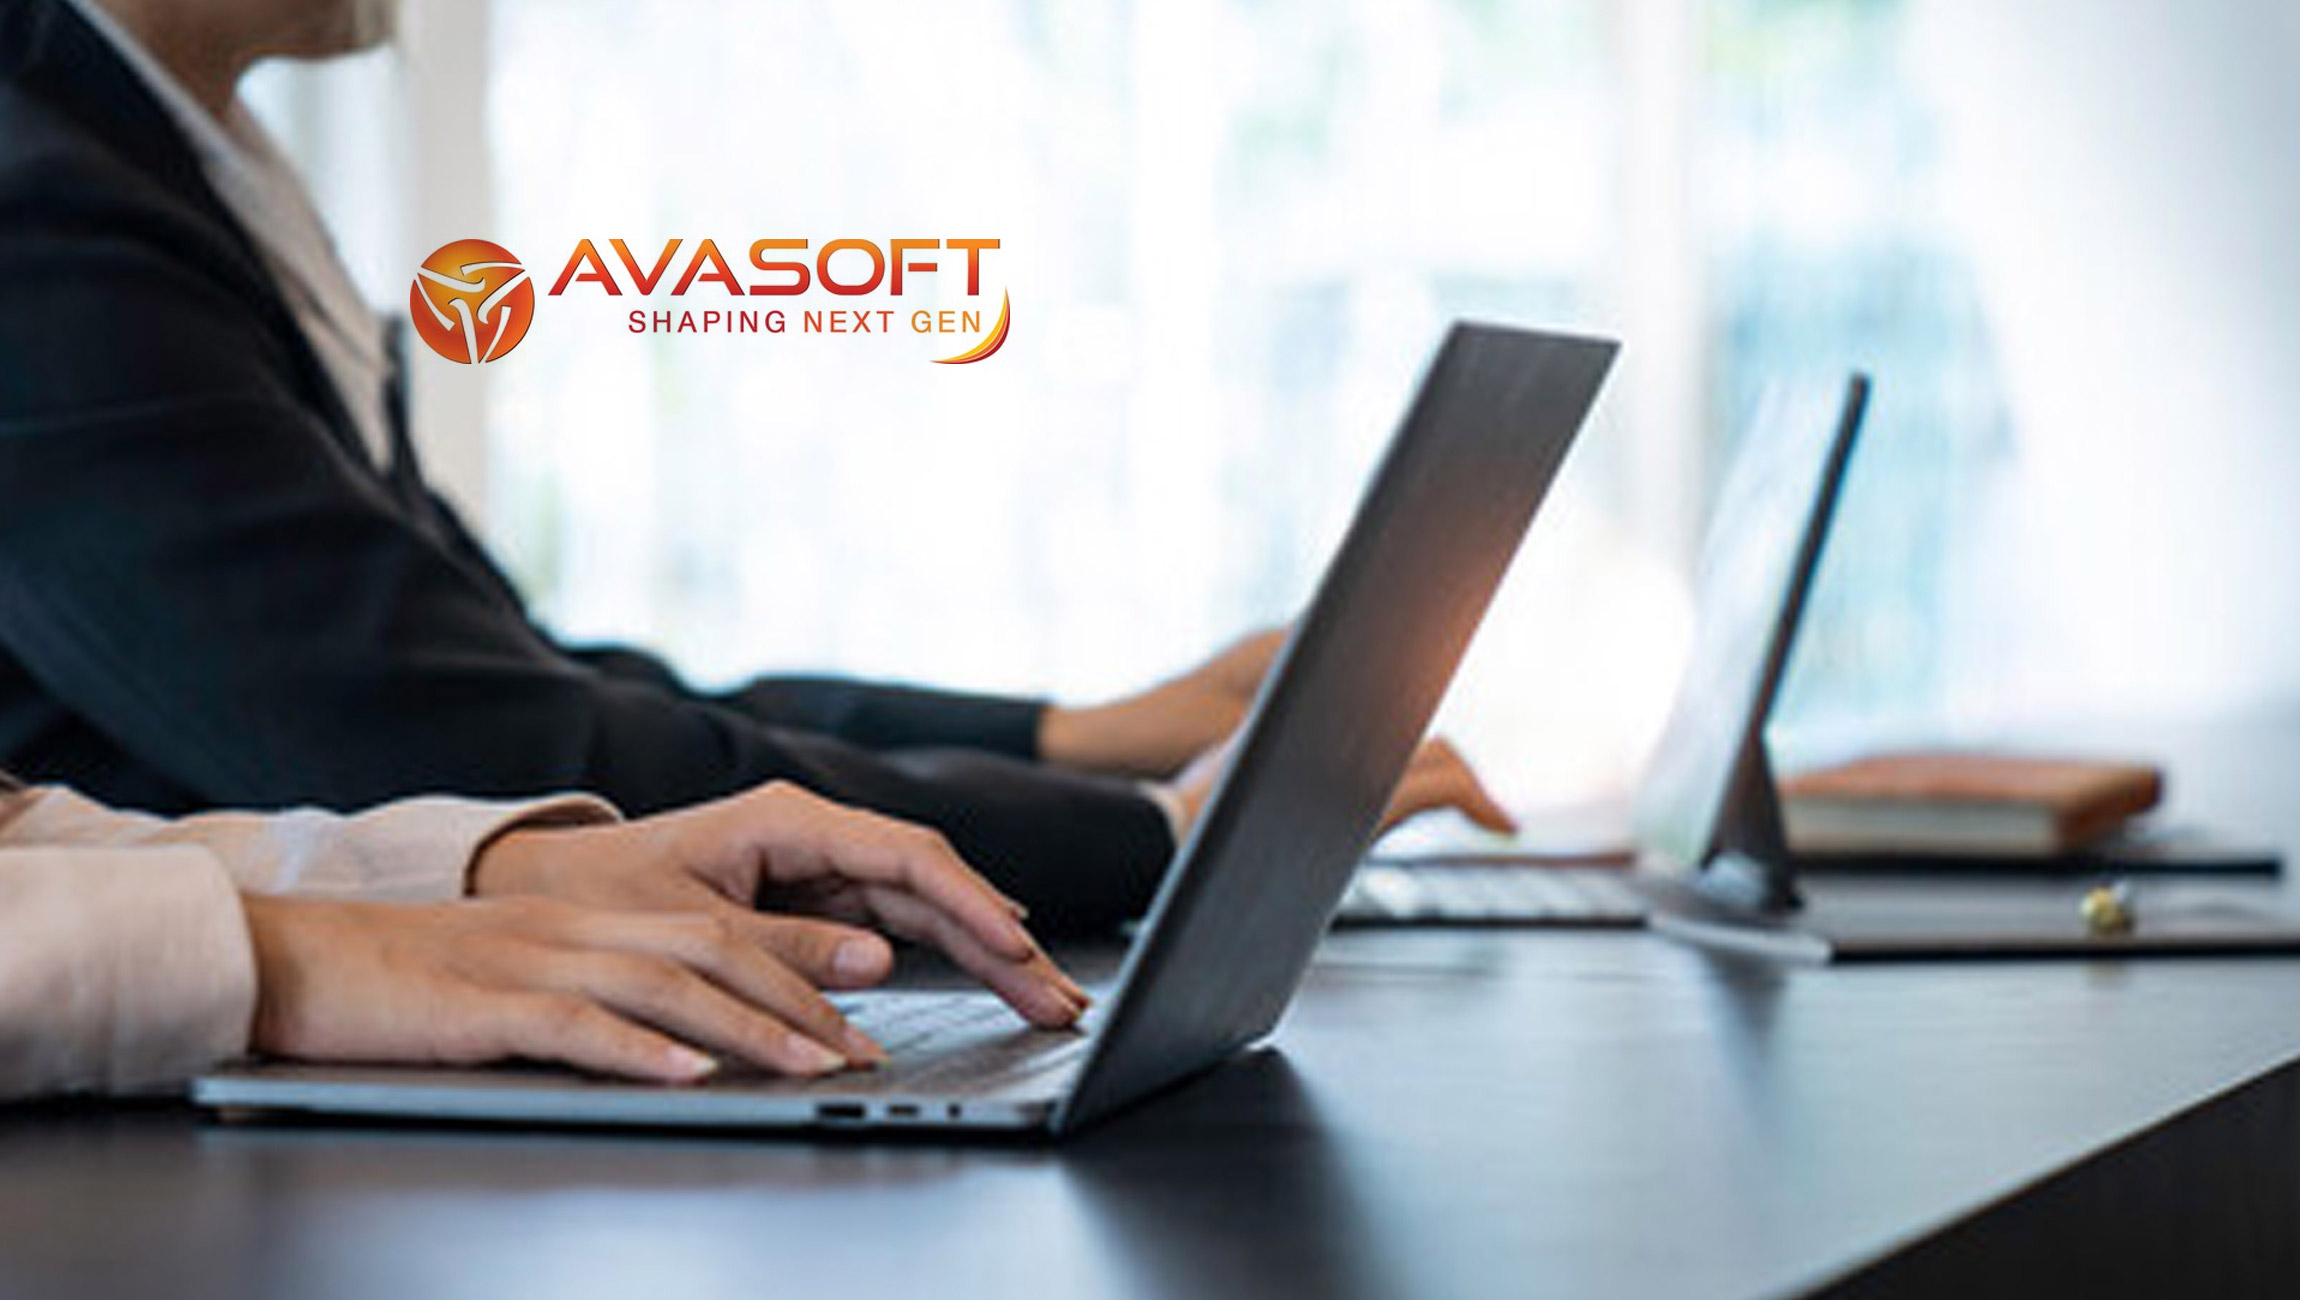 AVASOFT ISO 9001:2015 Certified for Qualify Management System